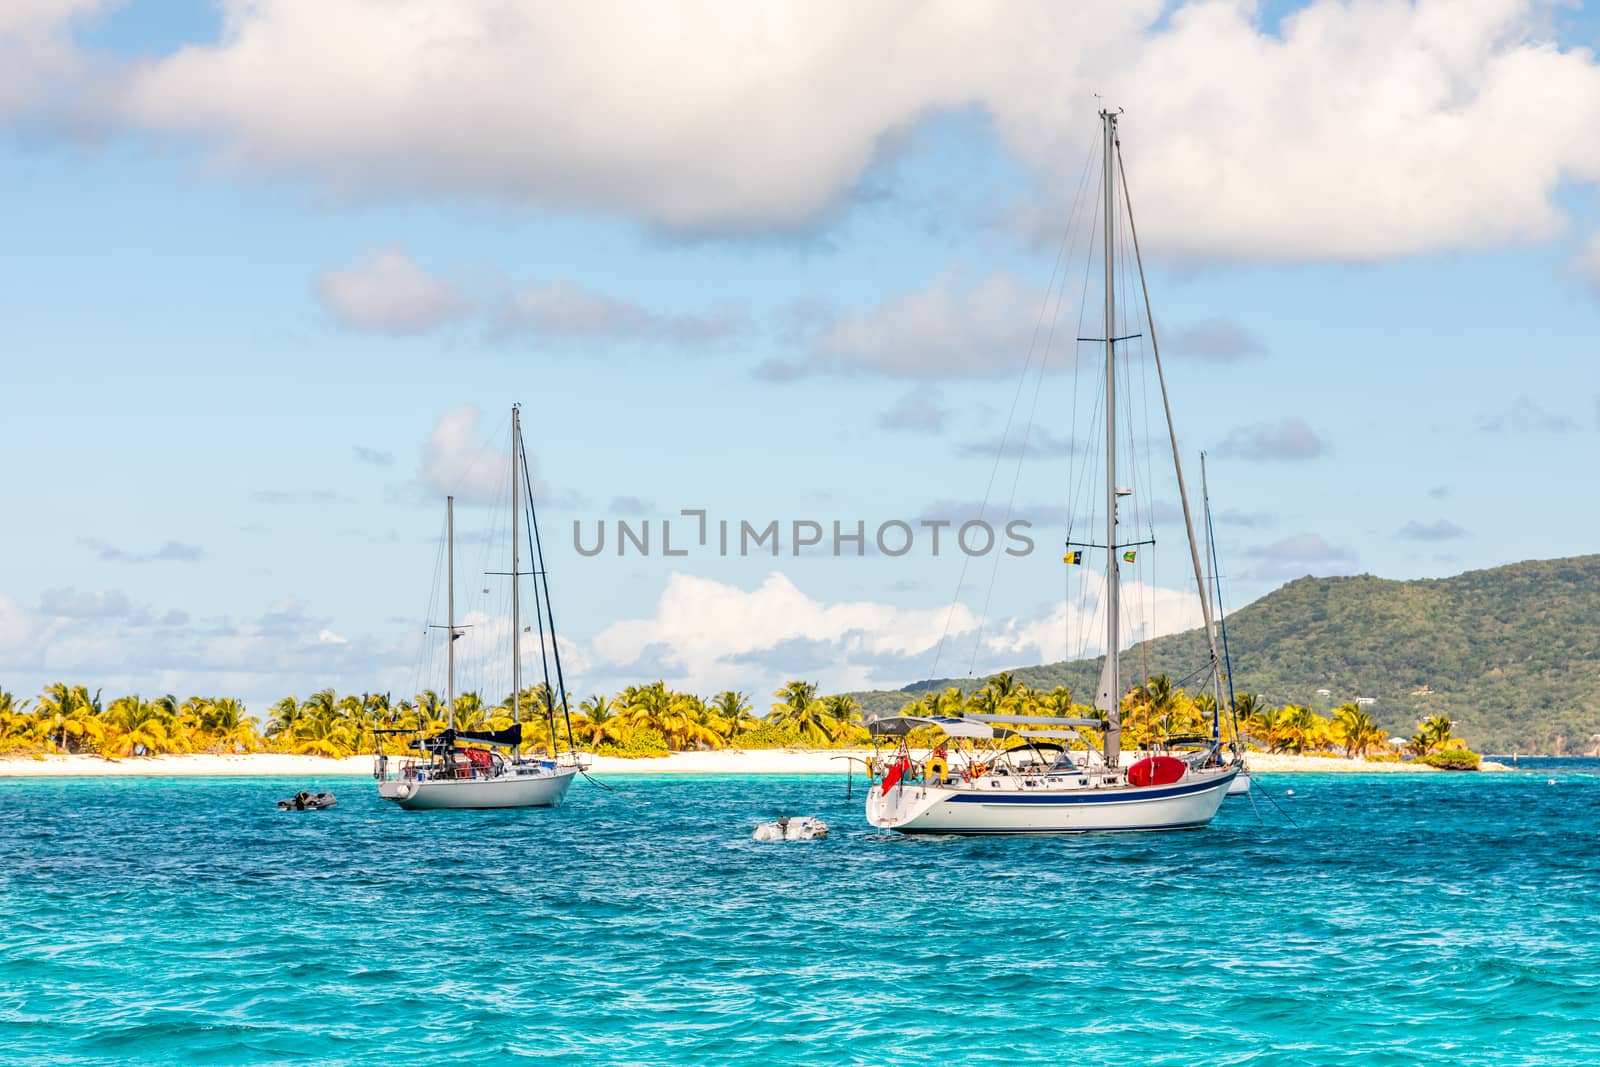 Turquoise sea and anchored yachts at Sandy beach island, near Ca by ambeon